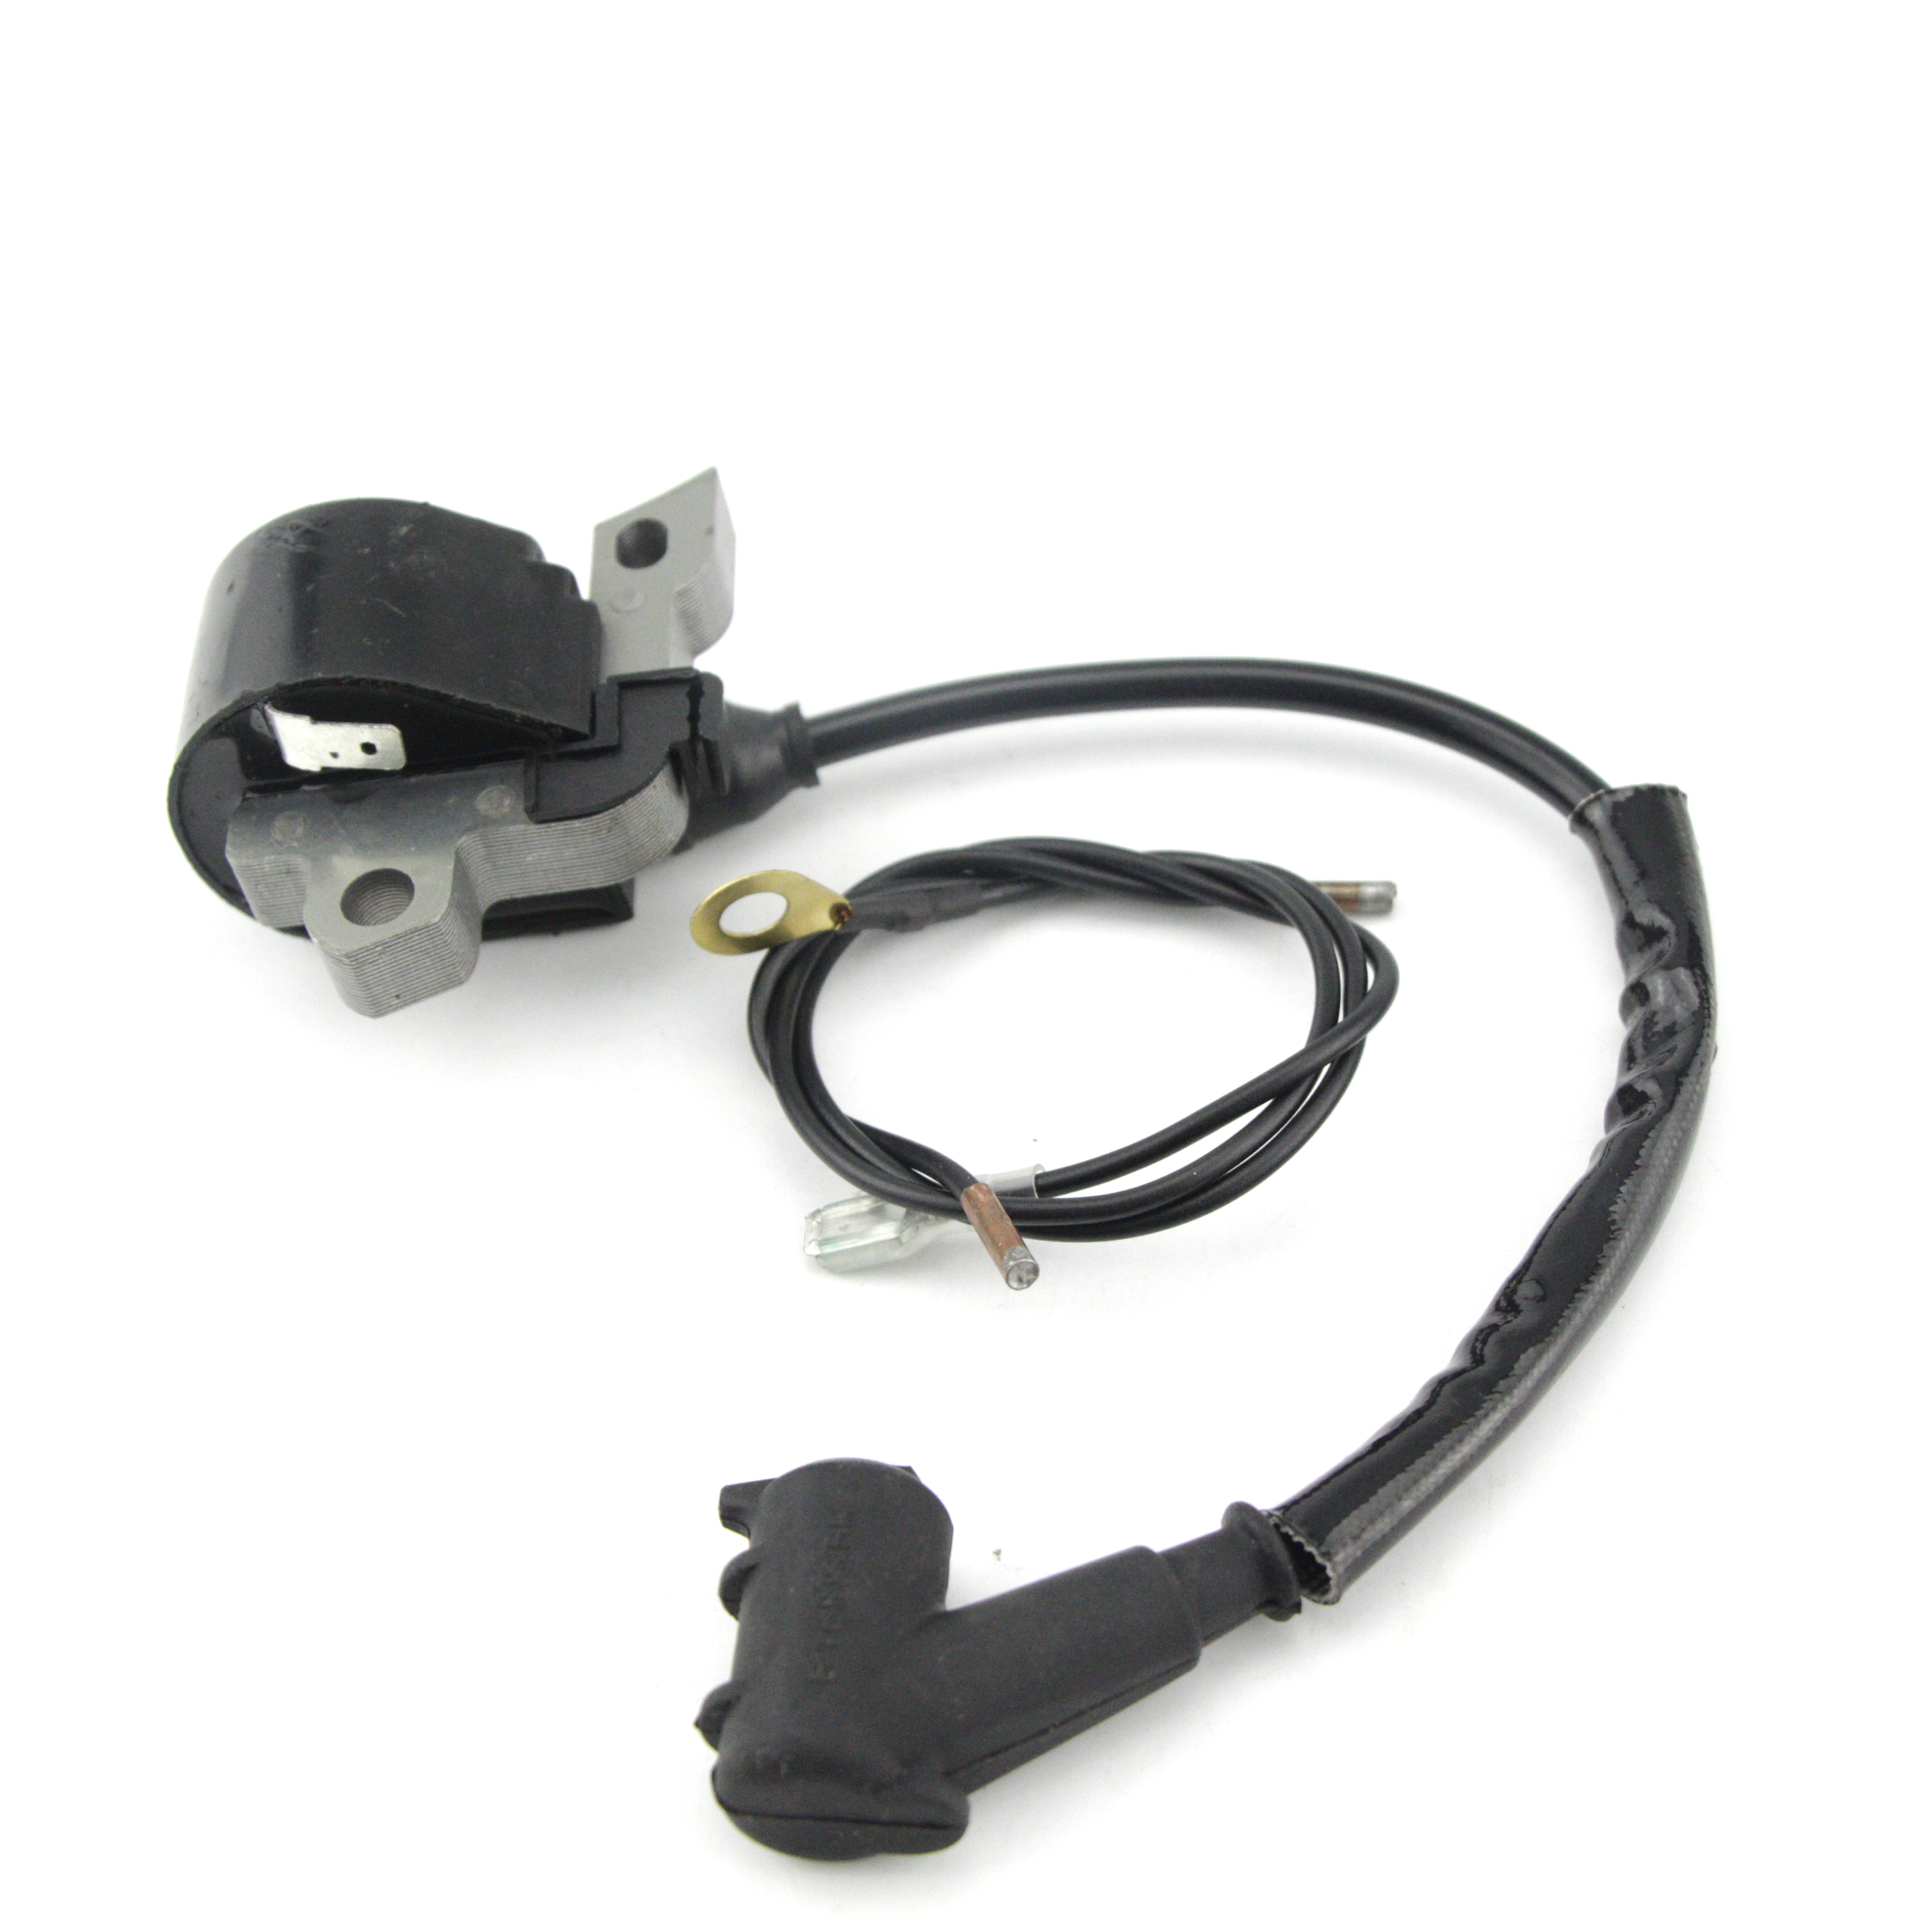 Ignition Coil For Stihl MS440 MS640 044 048 MS290 MS310 MS360 MS380 MS390 029 036 038 039 MS240 MS260 MS280 024 026 028 038 MS380 MS381 038 AV SUPER MAGNUM Chainsaw 0000 400 1300